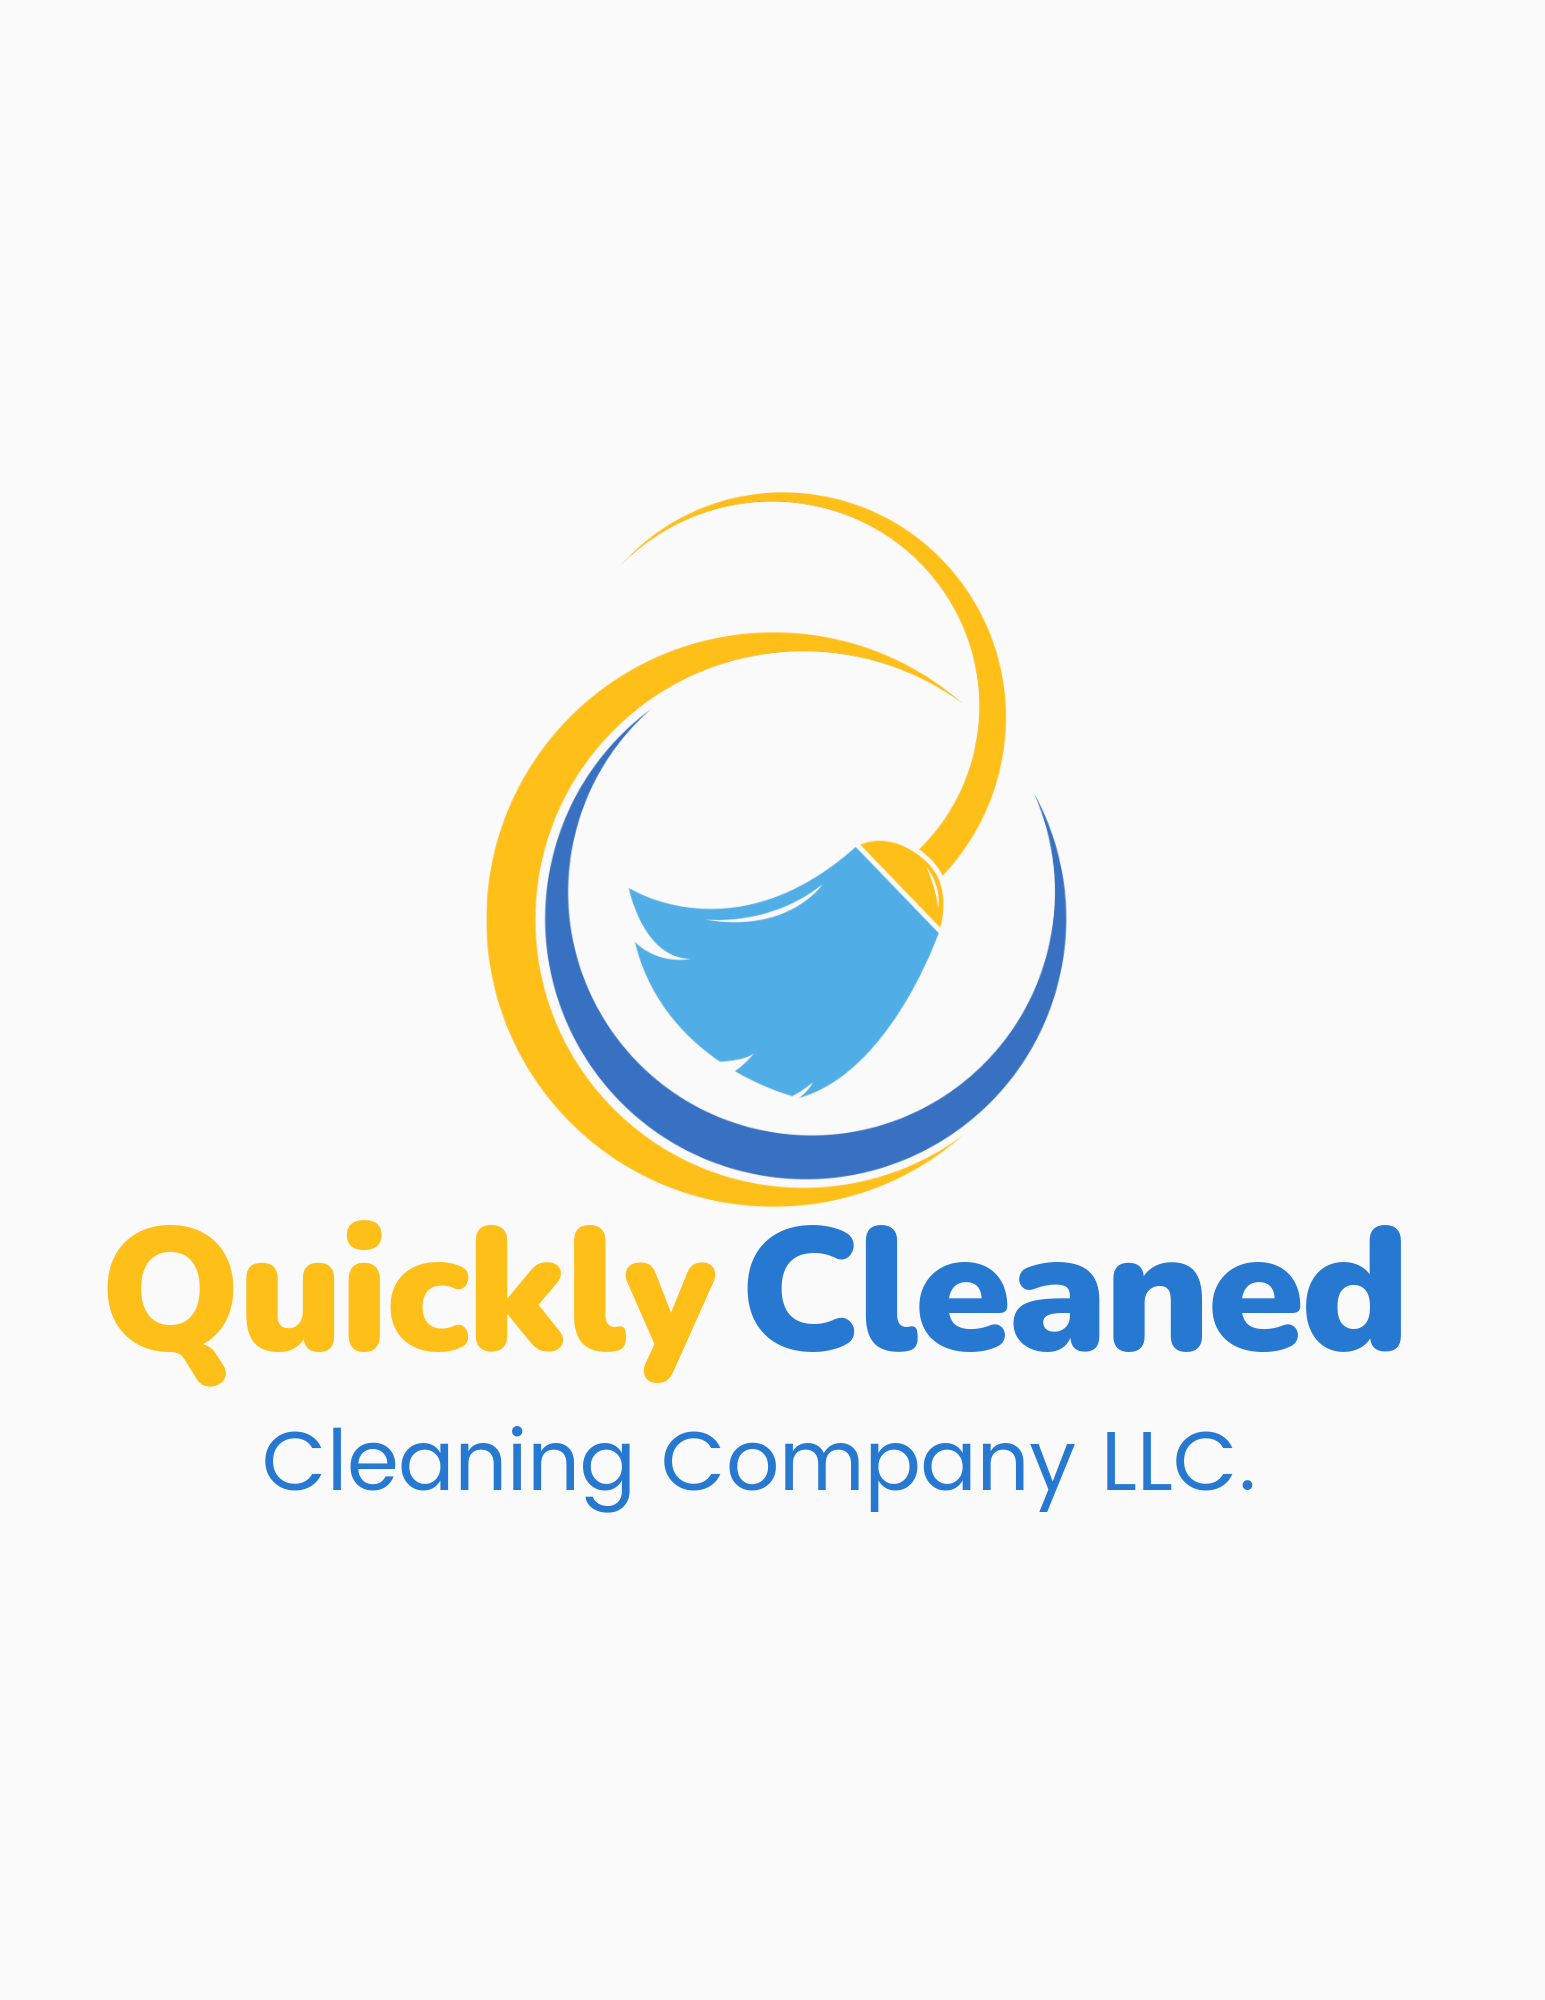 Quickly Cleaned Cleaning Company L.L.C Logo